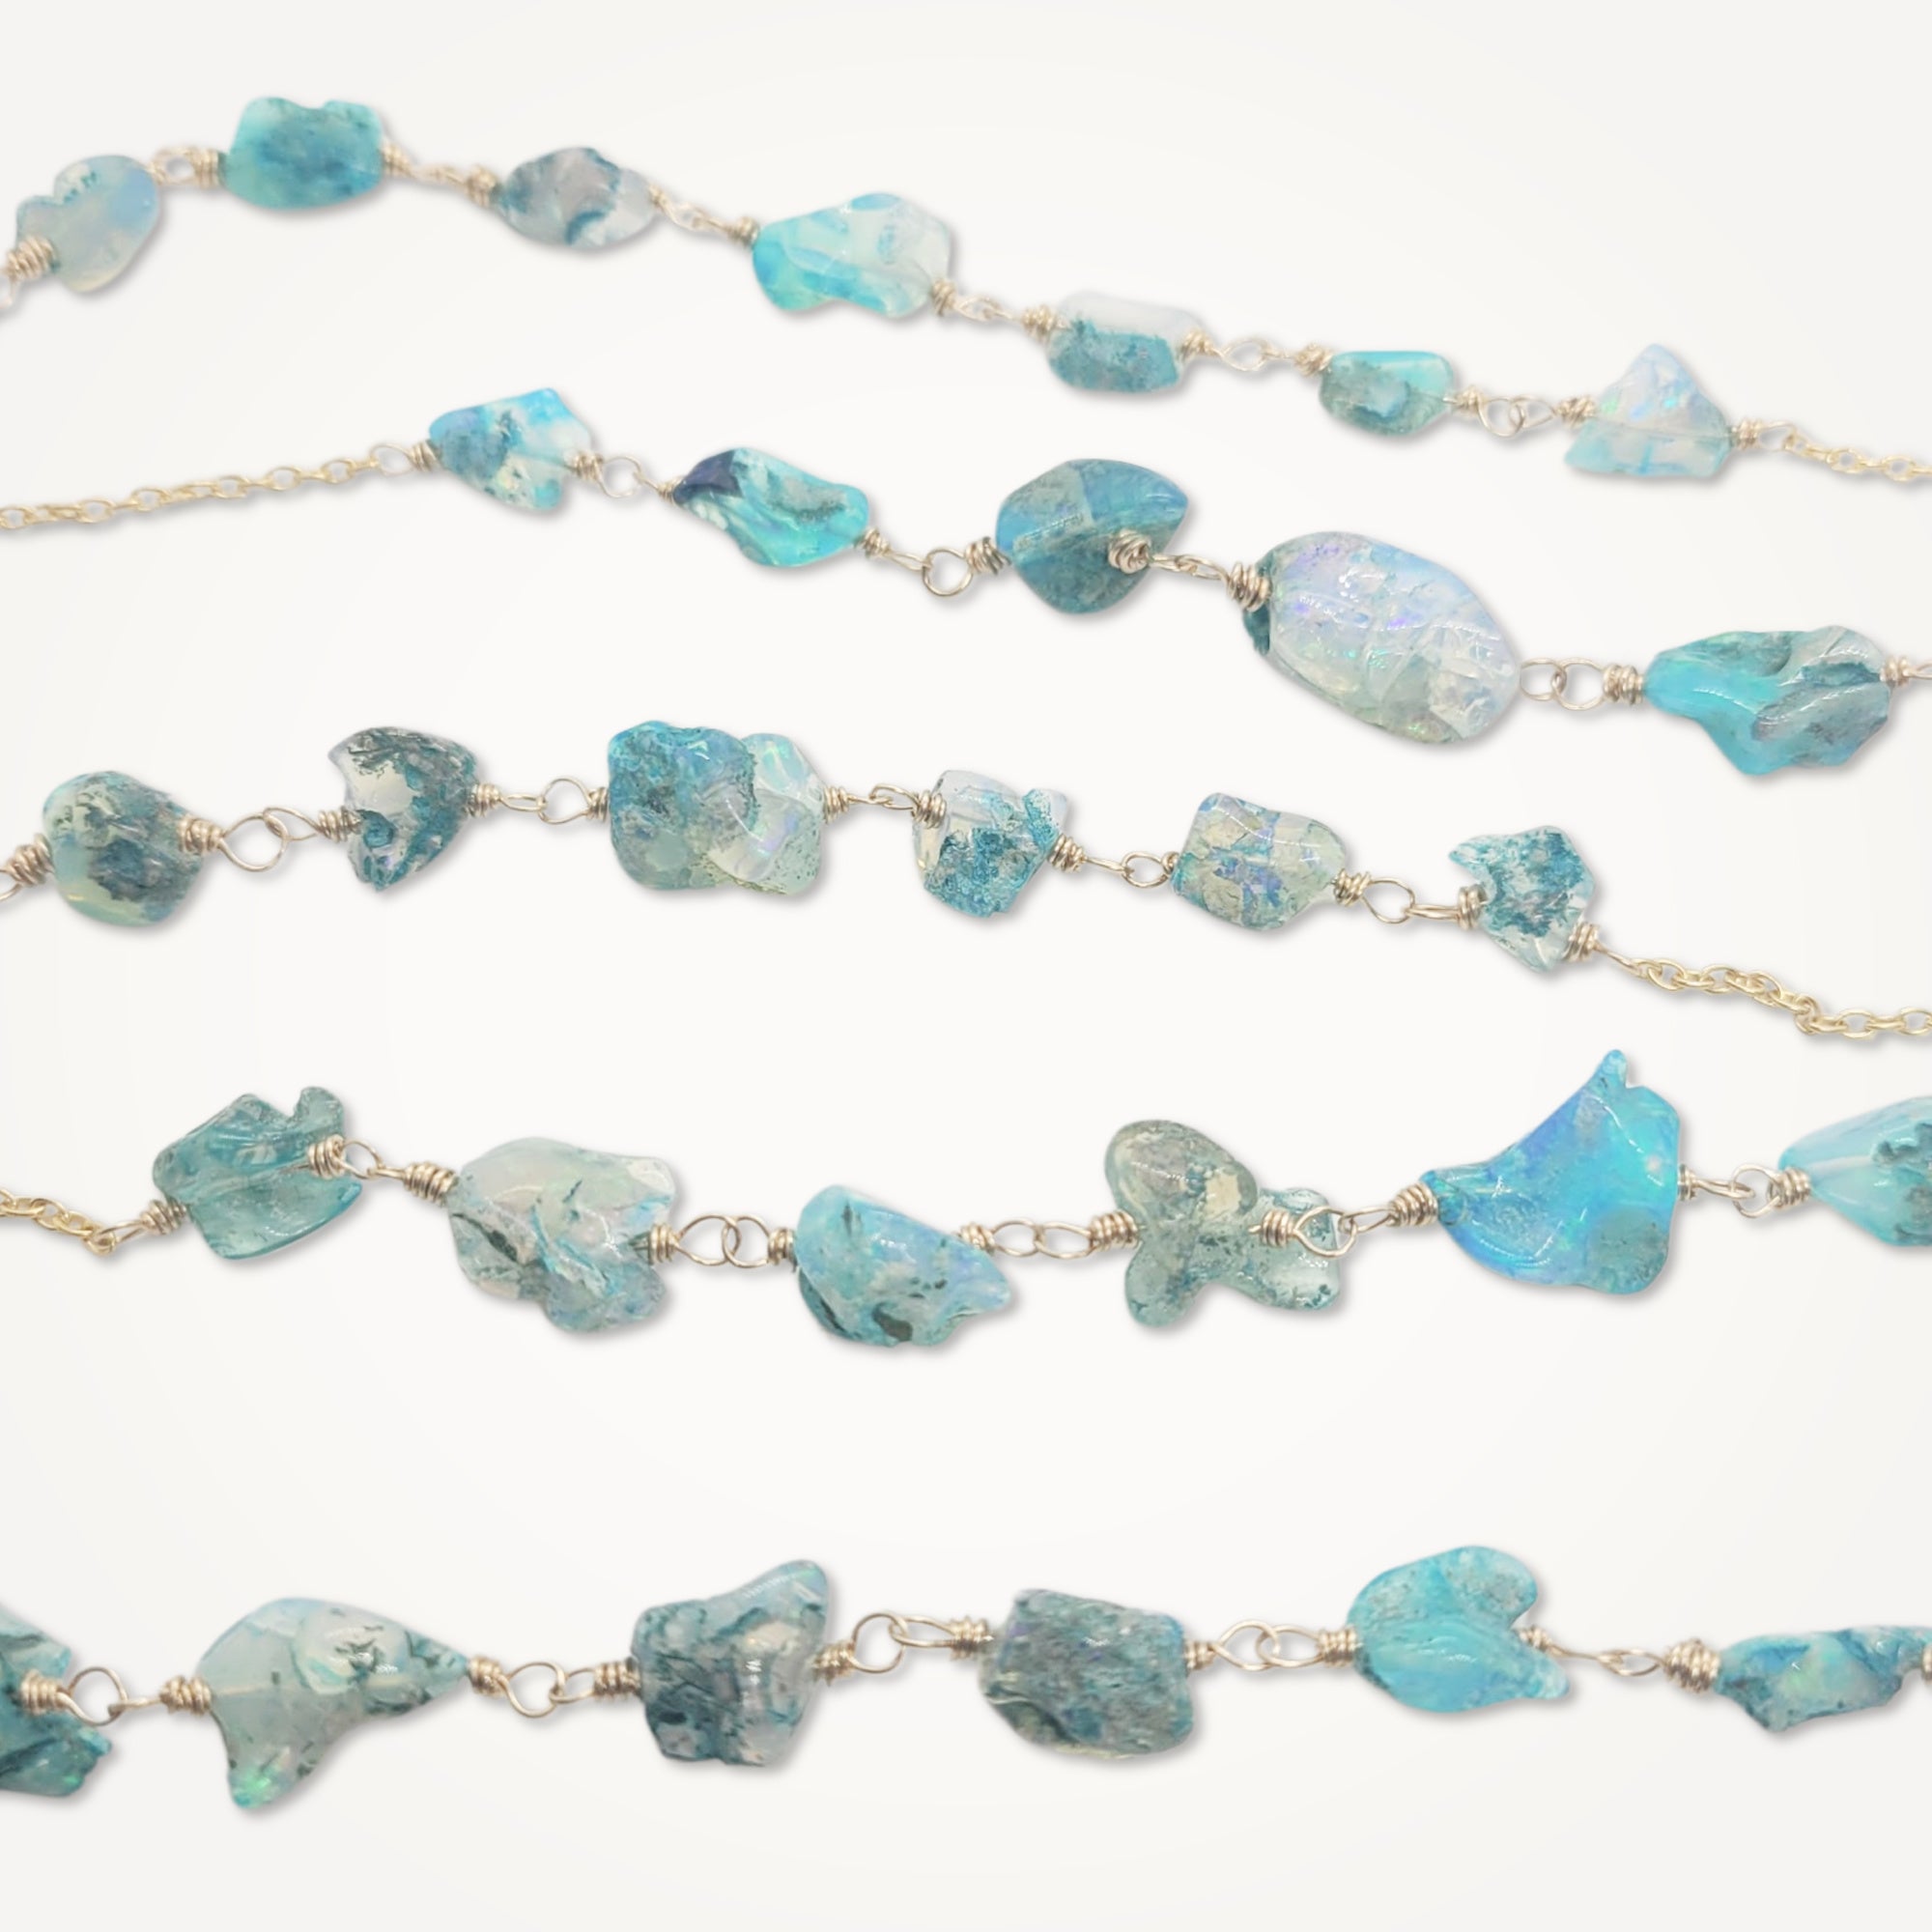 Caring for Beaded Opal Jewelry